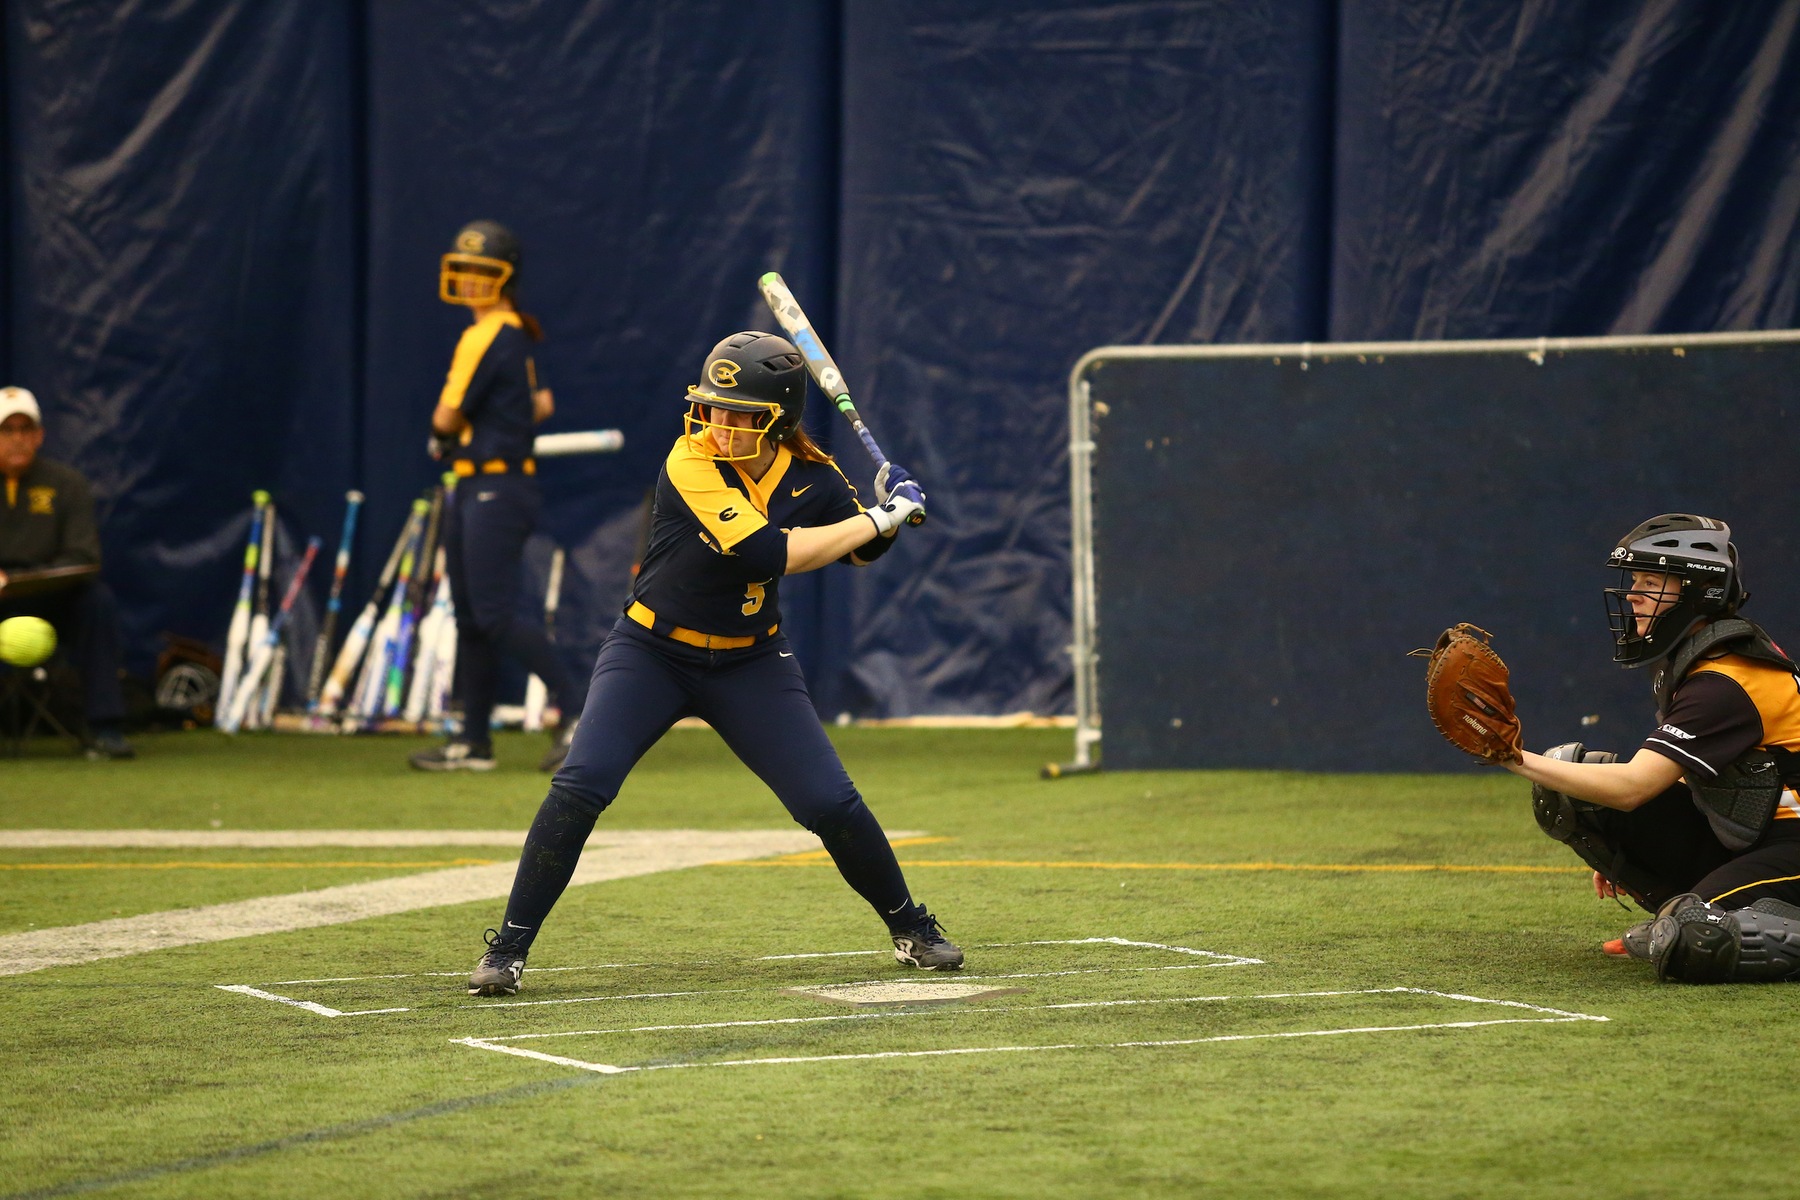 Softball doubles up on mercy rule wins to close out Rebel Spring Games